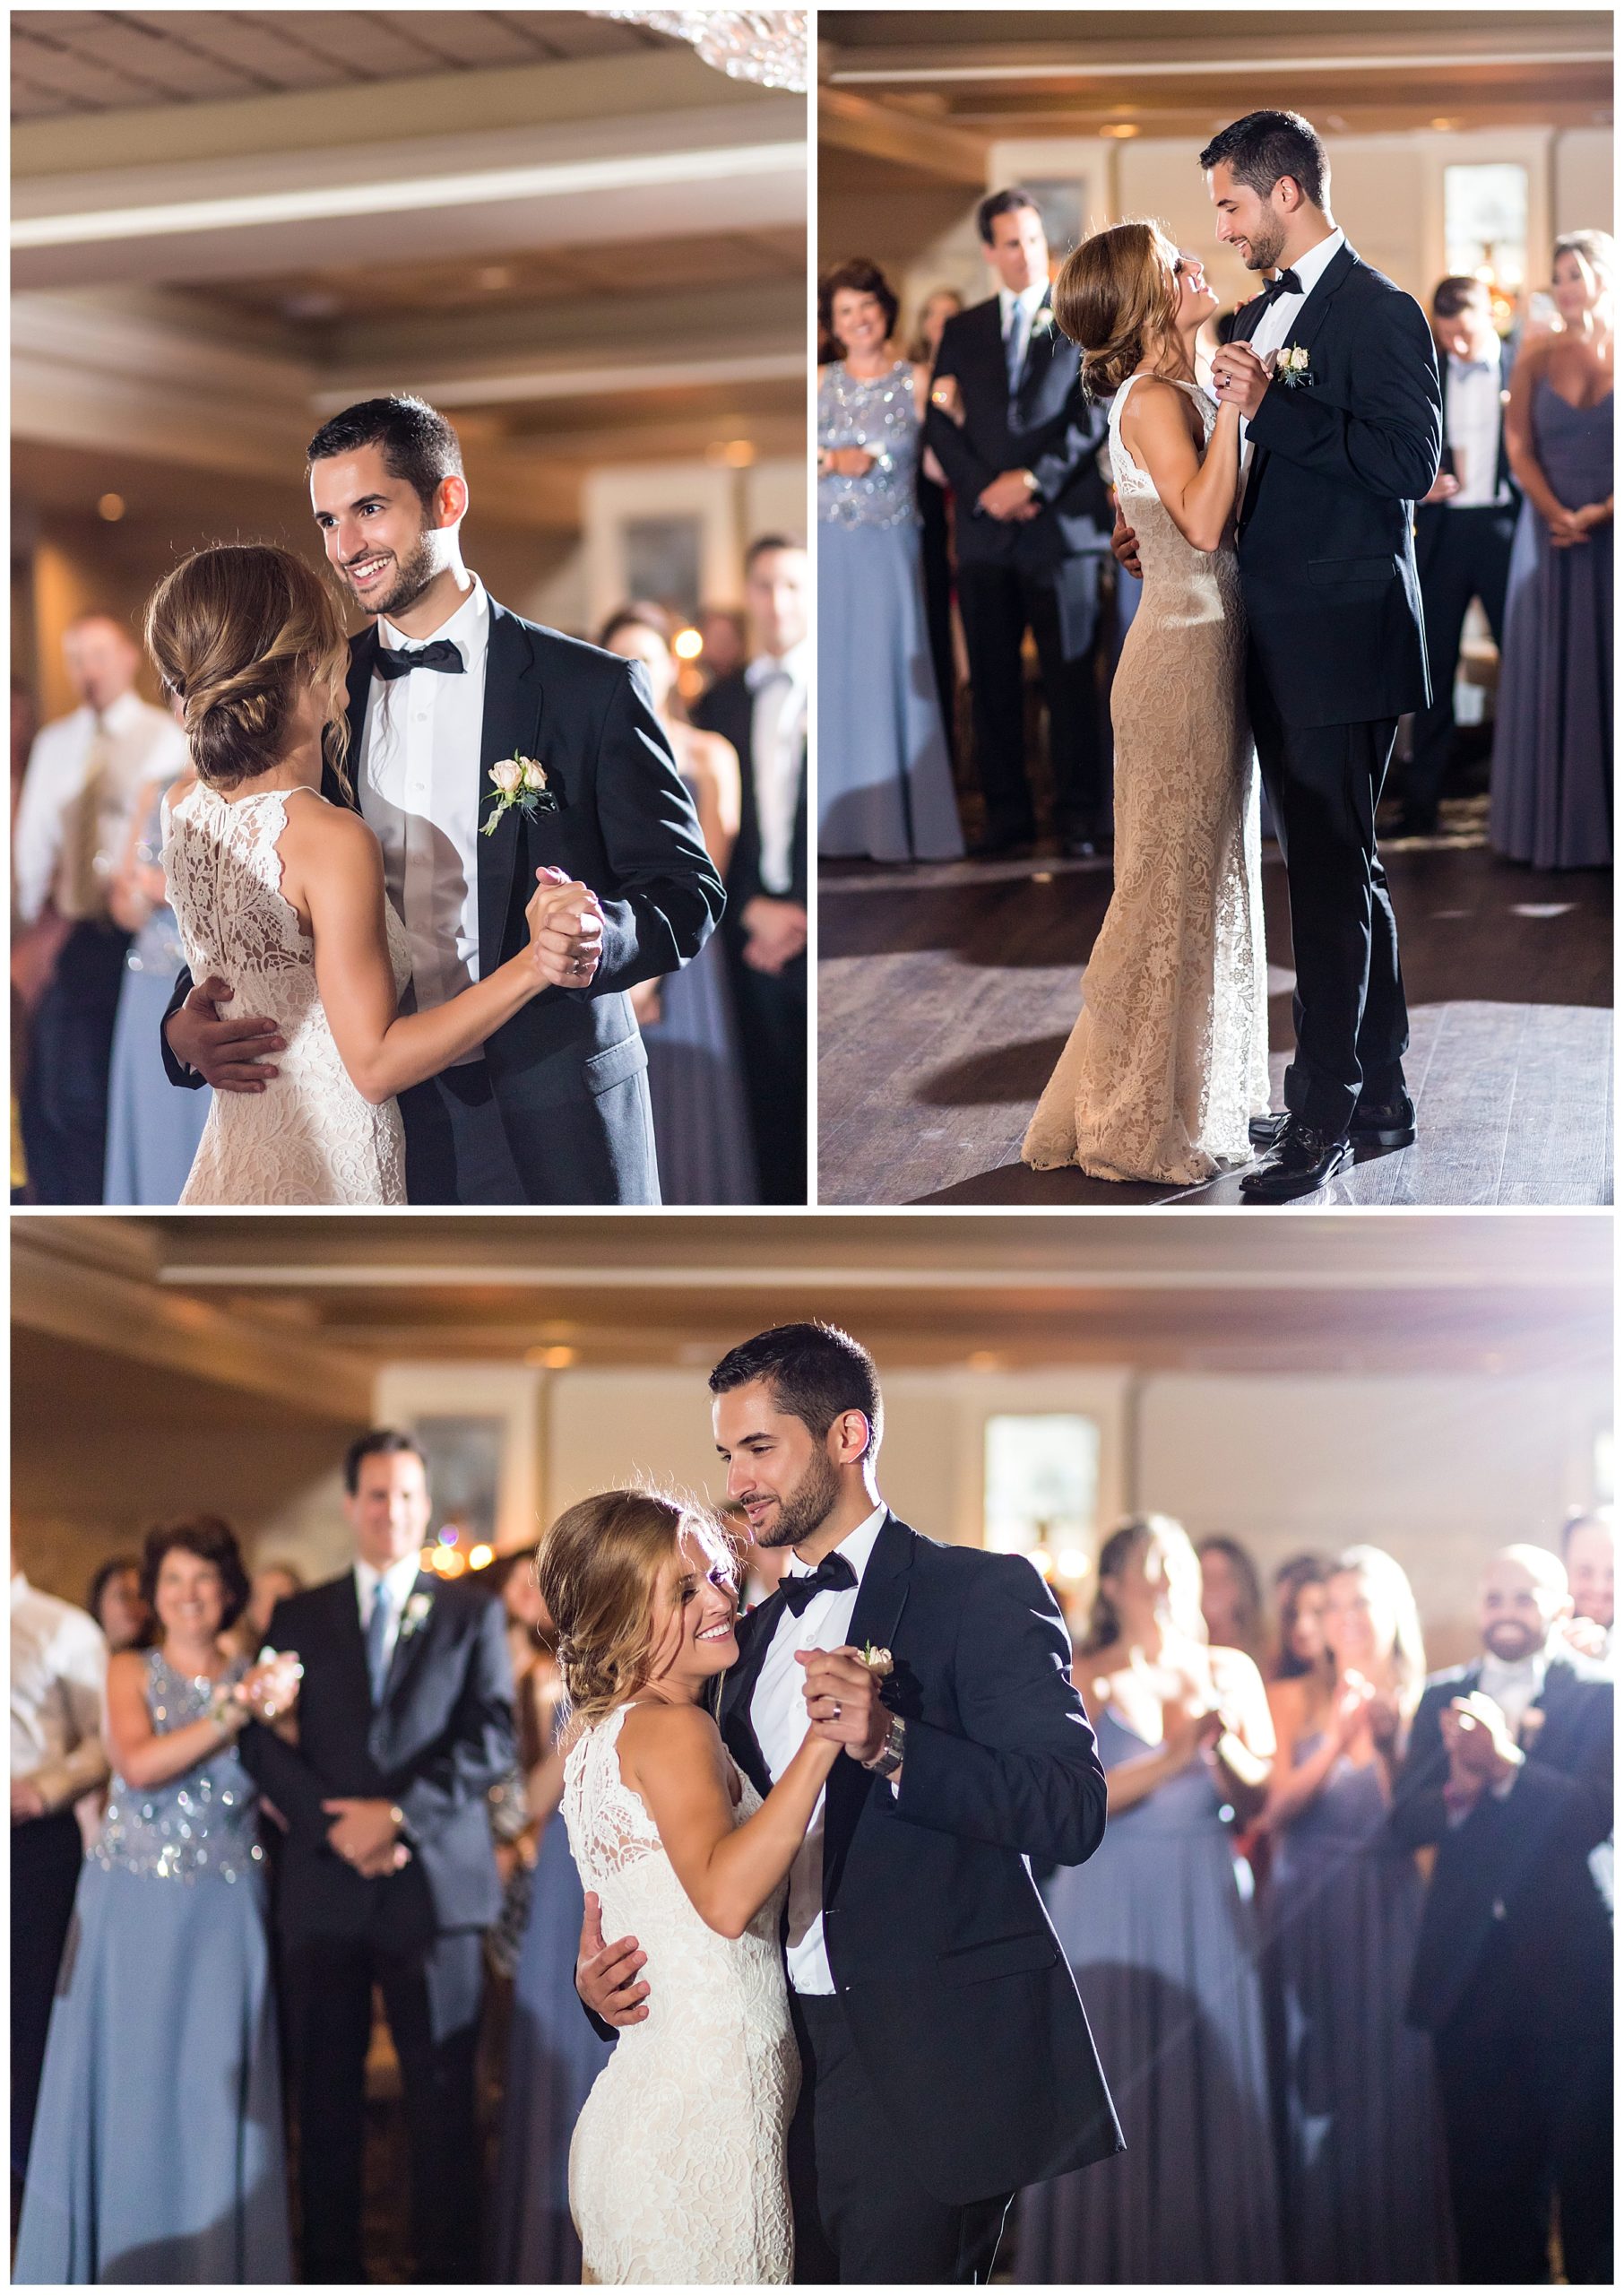 Bride and groom first dance collage at The Olde Mill Inn wedding reception